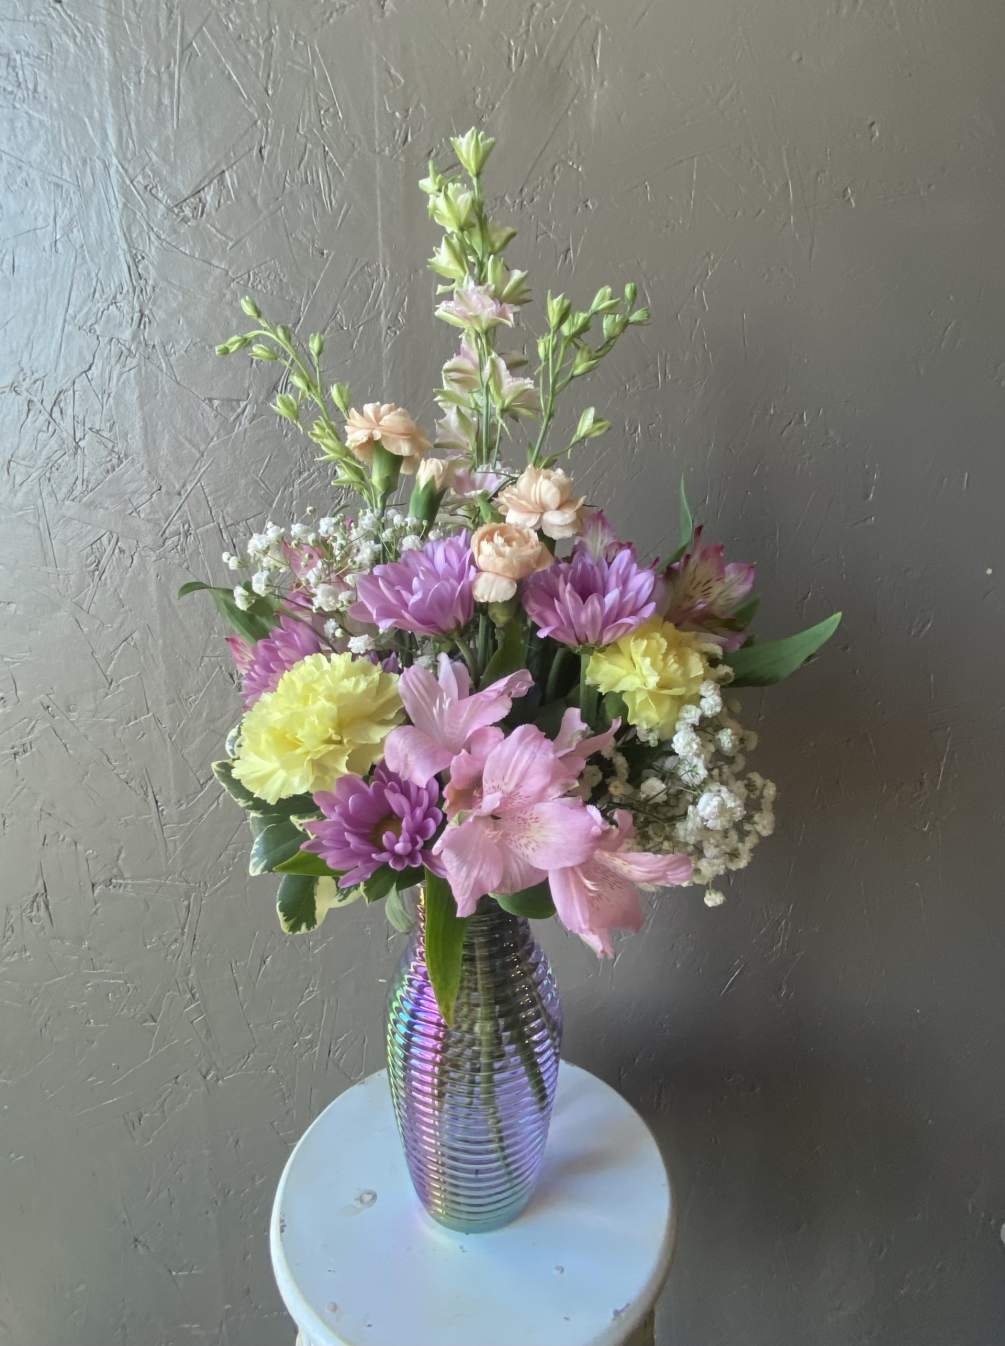 Pastel mixed florals fill a beautiful lavender iridescent vase. All flowers and